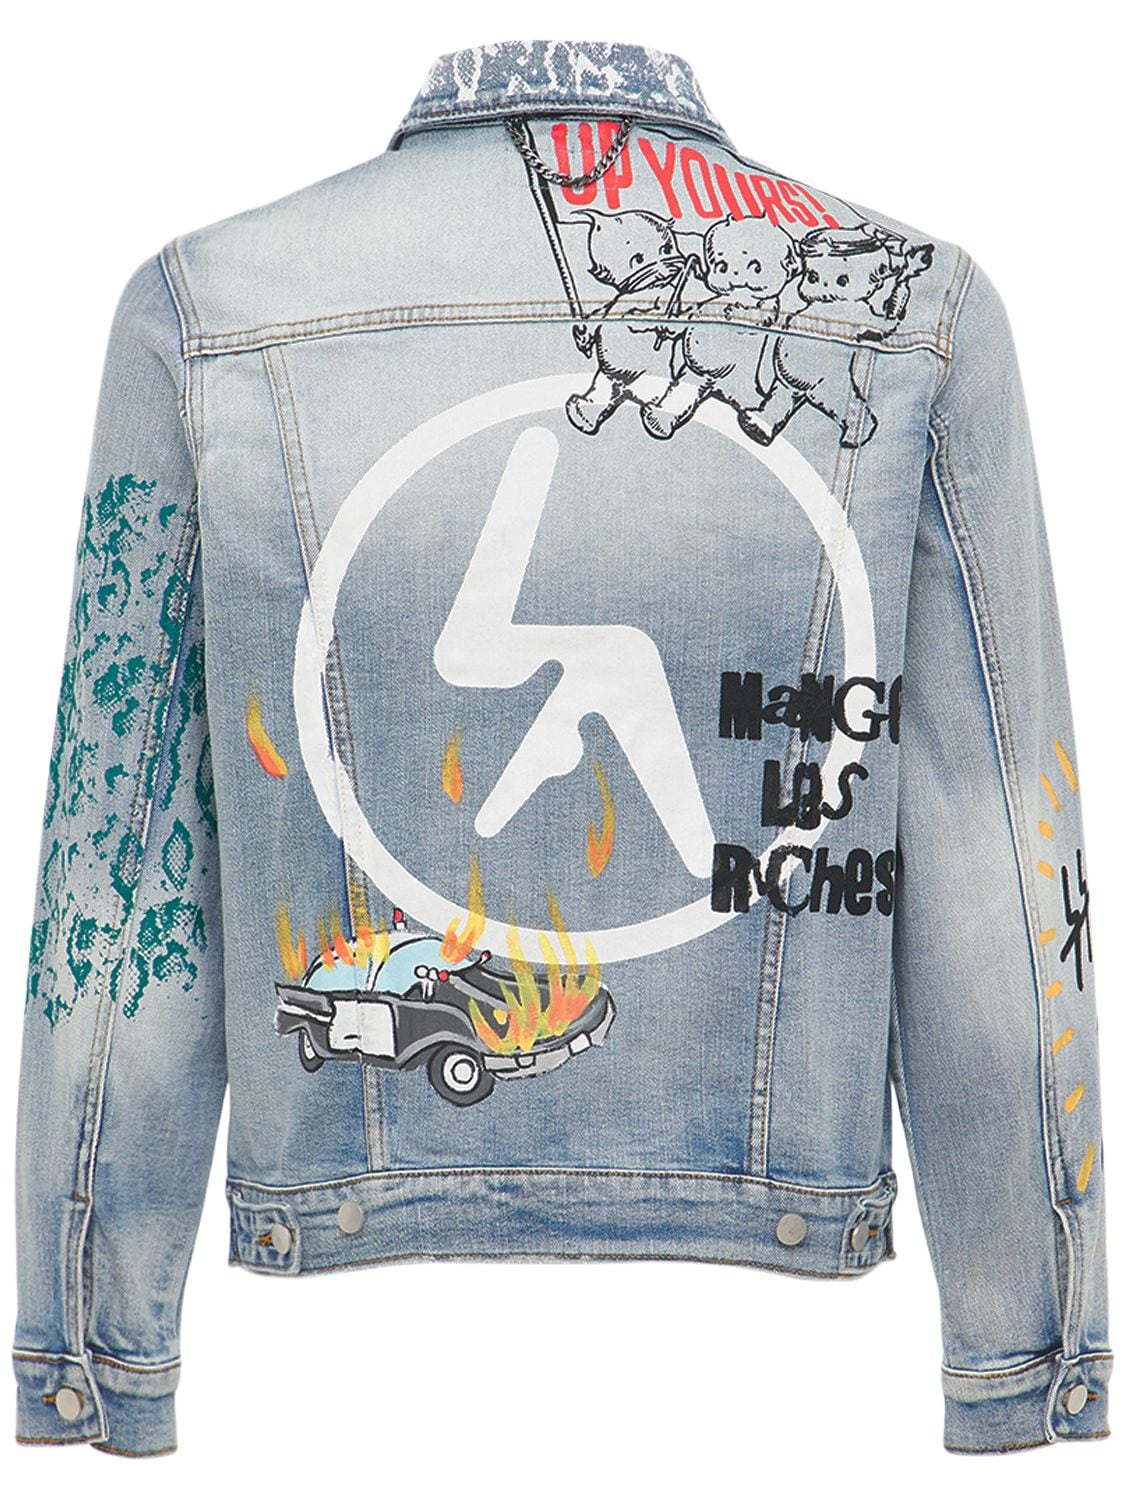 Lifted Anchors City Hall Printed Denim Jacket In Blue,multi | ModeSens